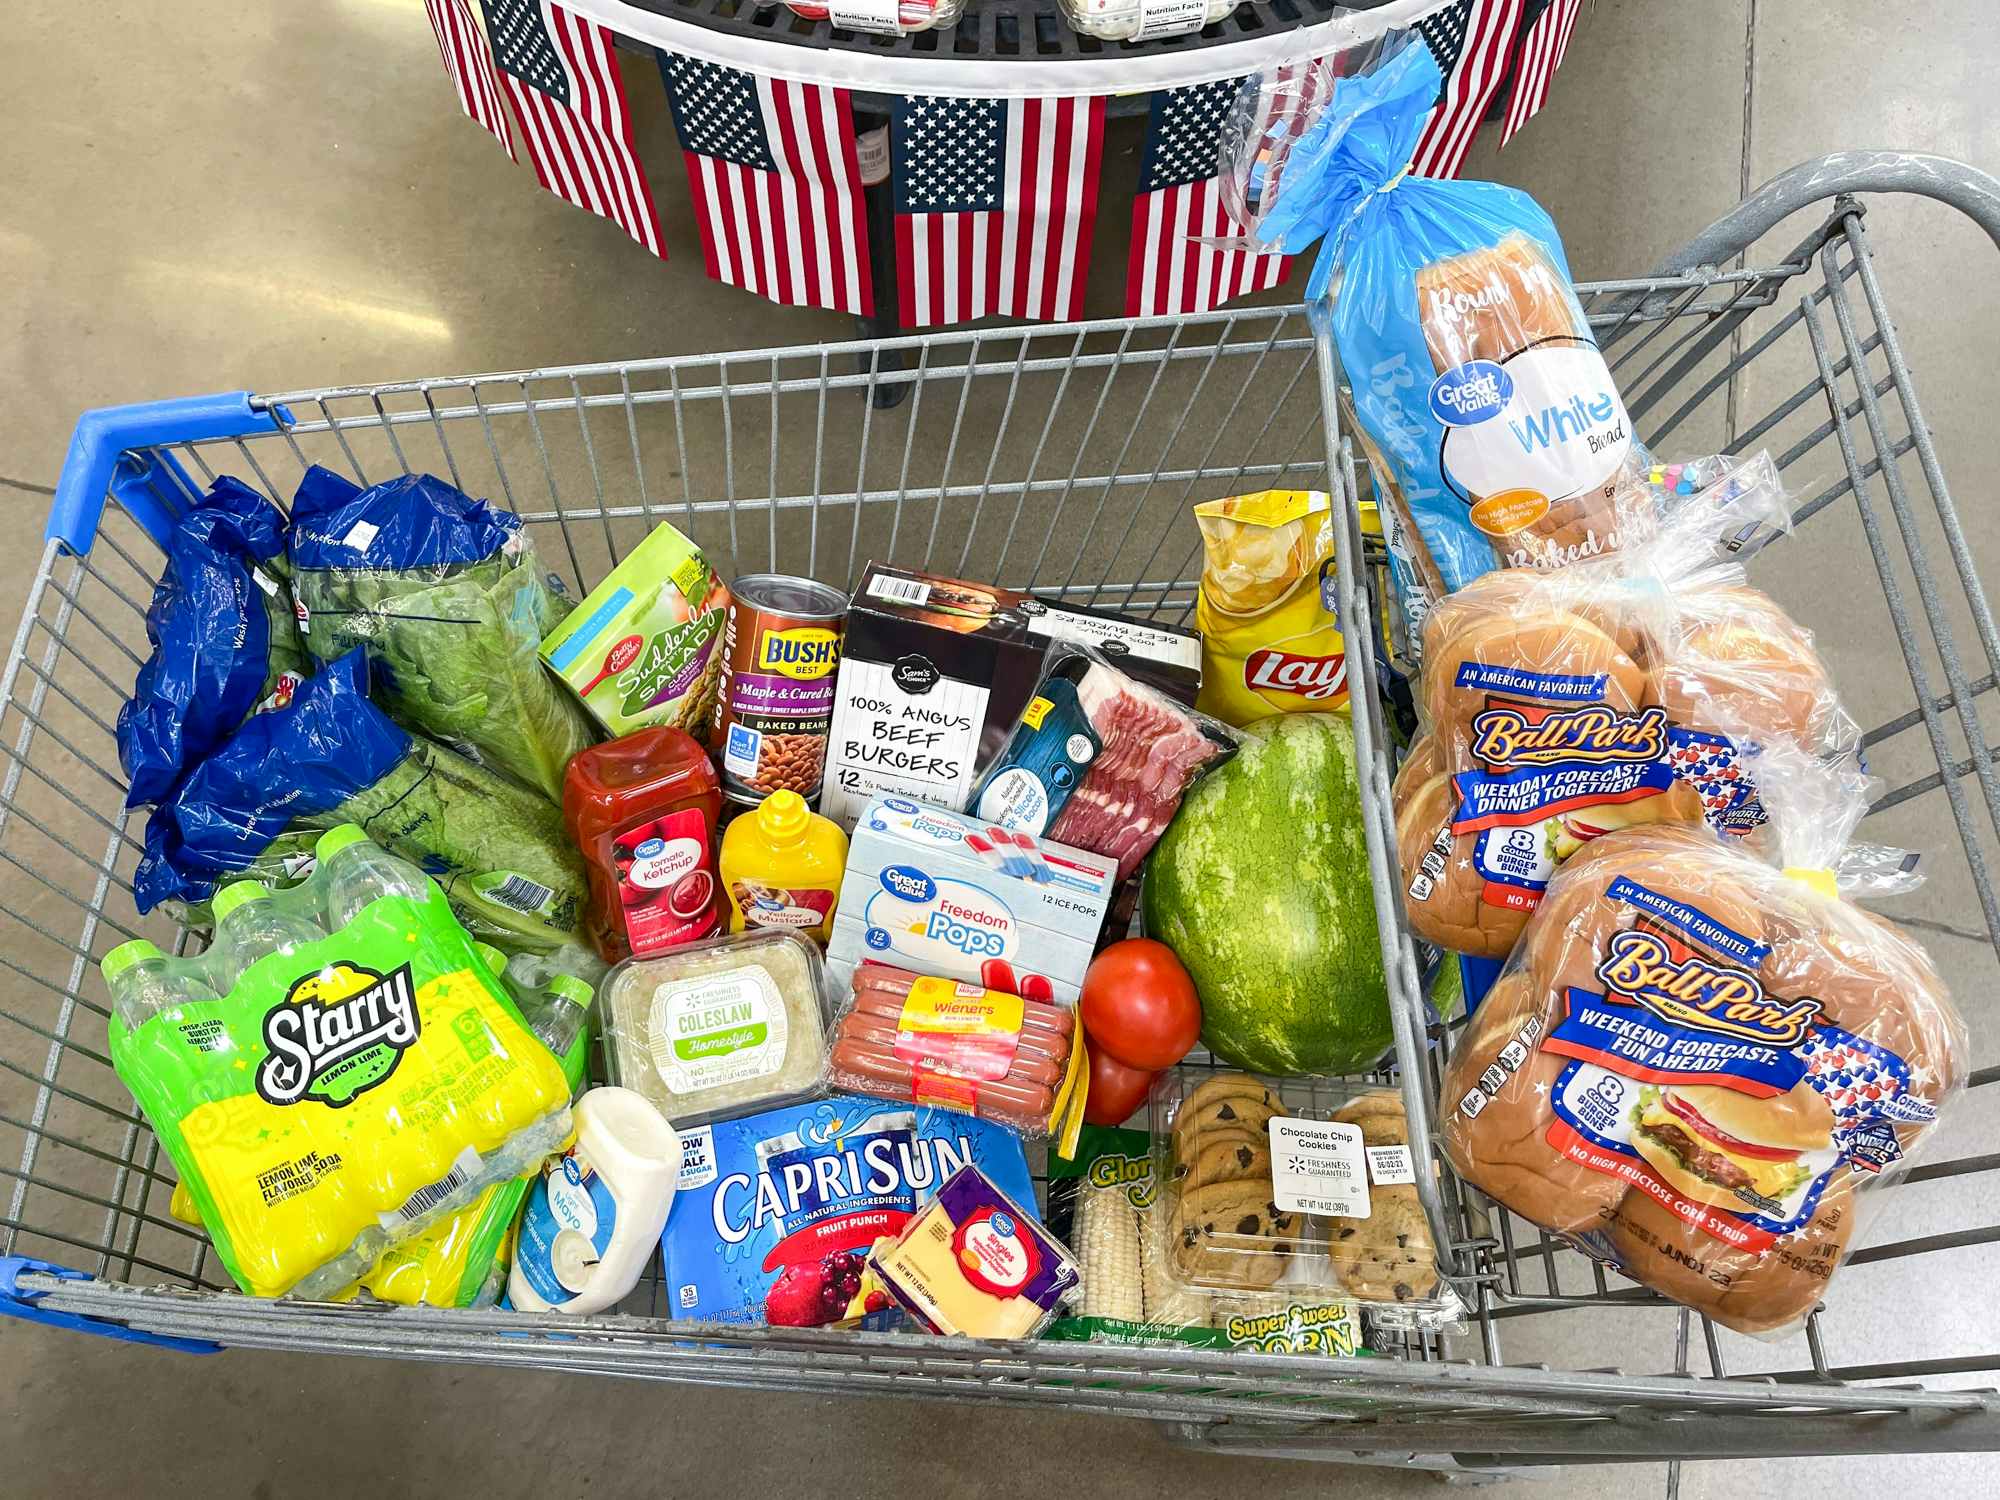 A cart filled with grilling essentials parked in front of some americana decor at Walmart